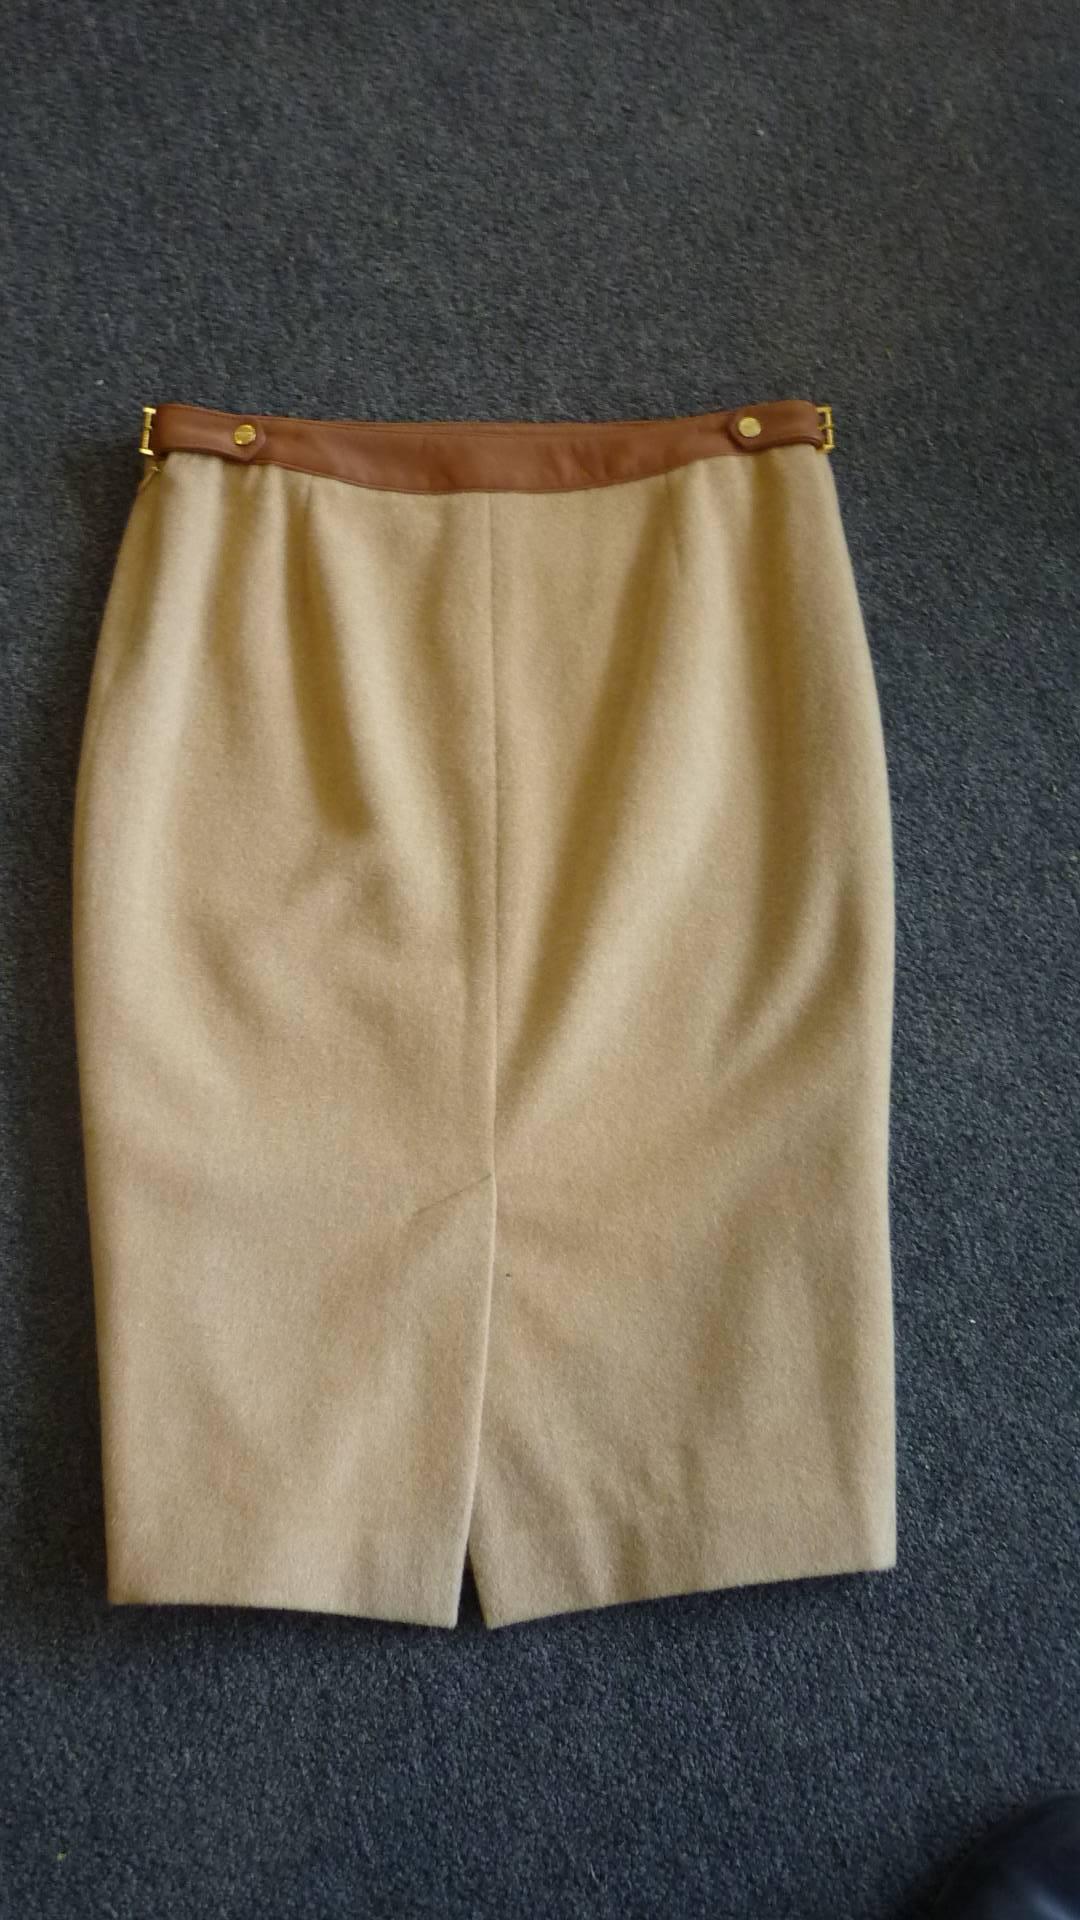 Beautiful pencil skirt with a leather waist band and gold buckle detail on the sides. The skirt is camel colored with a contrasting tan leather waist band. There is a small centre back slit and a side zip.